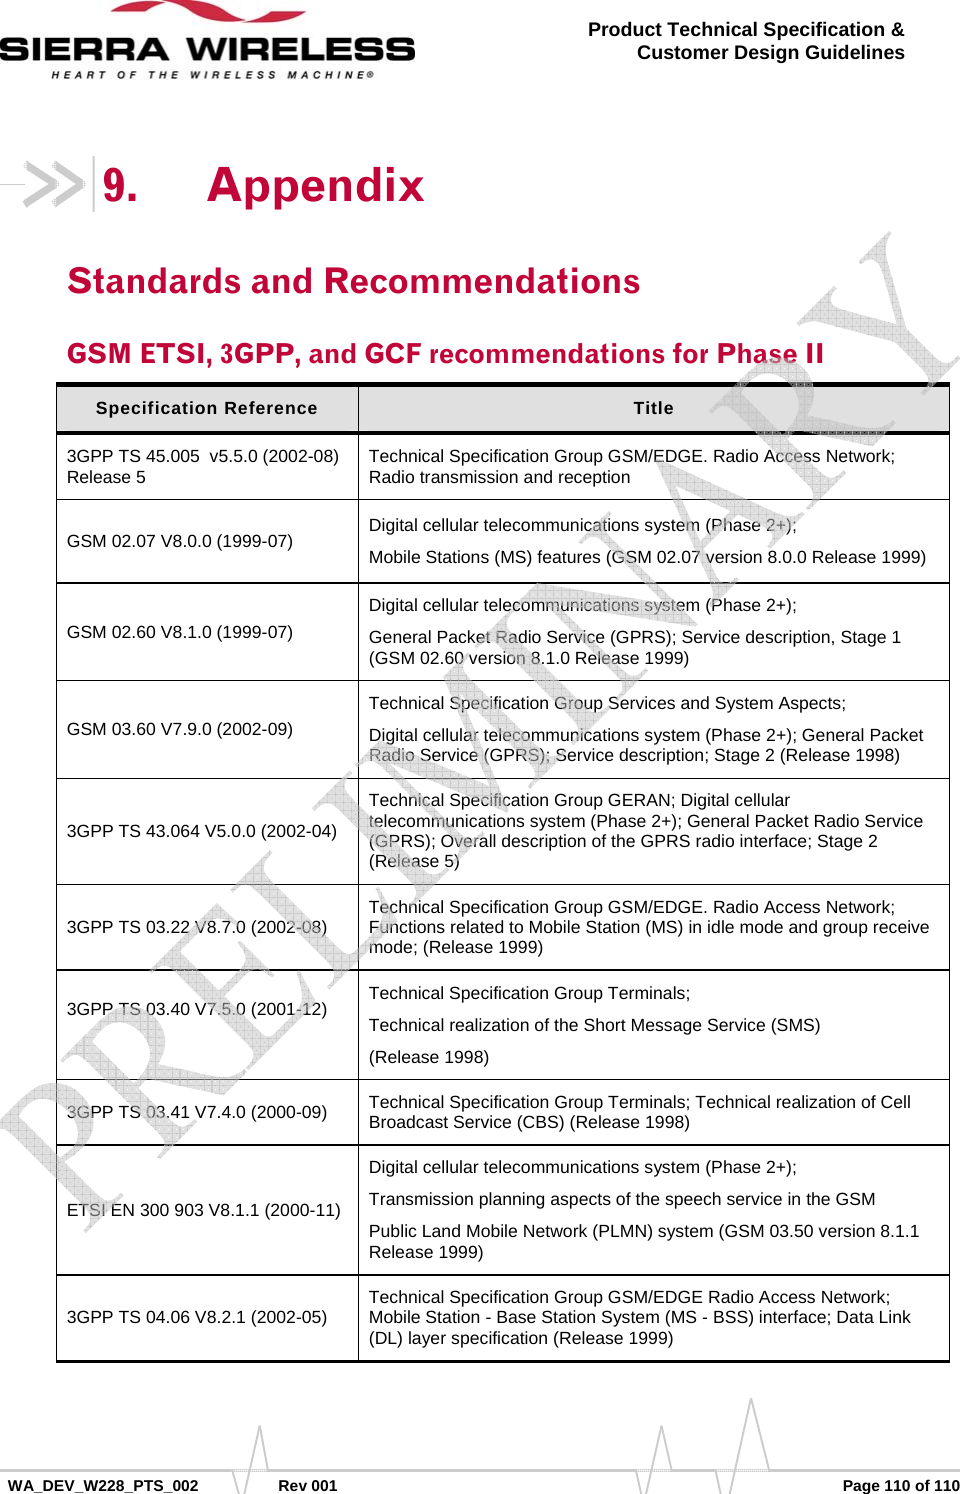      WA_DEV_W228_PTS_002 Rev 001  Page 110 of 110 Product Technical Specification &amp; Customer Design Guidelines 9. Appendix Standards and Recommendations GSM ETSI, 3GPP, and GCF recommendations for Phase II Specification Reference  Title 3GPP TS 45.005  v5.5.0 (2002-08) Release 5   Technical Specification Group GSM/EDGE. Radio Access Network; Radio transmission and reception GSM 02.07 V8.0.0 (1999-07)  Digital cellular telecommunications system (Phase 2+); Mobile Stations (MS) features (GSM 02.07 version 8.0.0 Release 1999) GSM 02.60 V8.1.0 (1999-07) Digital cellular telecommunications system (Phase 2+); General Packet Radio Service (GPRS); Service description, Stage 1 (GSM 02.60 version 8.1.0 Release 1999) GSM 03.60 V7.9.0 (2002-09) Technical Specification Group Services and System Aspects; Digital cellular telecommunications system (Phase 2+); General Packet Radio Service (GPRS); Service description; Stage 2 (Release 1998) 3GPP TS 43.064 V5.0.0 (2002-04) Technical Specification Group GERAN; Digital cellular telecommunications system (Phase 2+); General Packet Radio Service (GPRS); Overall description of the GPRS radio interface; Stage 2 (Release 5) 3GPP TS 03.22 V8.7.0 (2002-08)  Technical Specification Group GSM/EDGE. Radio Access Network; Functions related to Mobile Station (MS) in idle mode and group receive mode; (Release 1999) 3GPP TS 03.40 V7.5.0 (2001-12)  Technical Specification Group Terminals; Technical realization of the Short Message Service (SMS) (Release 1998) 3GPP TS 03.41 V7.4.0 (2000-09)  Technical Specification Group Terminals; Technical realization of Cell Broadcast Service (CBS) (Release 1998) ETSI EN 300 903 V8.1.1 (2000-11) Digital cellular telecommunications system (Phase 2+); Transmission planning aspects of the speech service in the GSM Public Land Mobile Network (PLMN) system (GSM 03.50 version 8.1.1 Release 1999) 3GPP TS 04.06 V8.2.1 (2002-05)  Technical Specification Group GSM/EDGE Radio Access Network; Mobile Station - Base Station System (MS - BSS) interface; Data Link (DL) layer specification (Release 1999)    